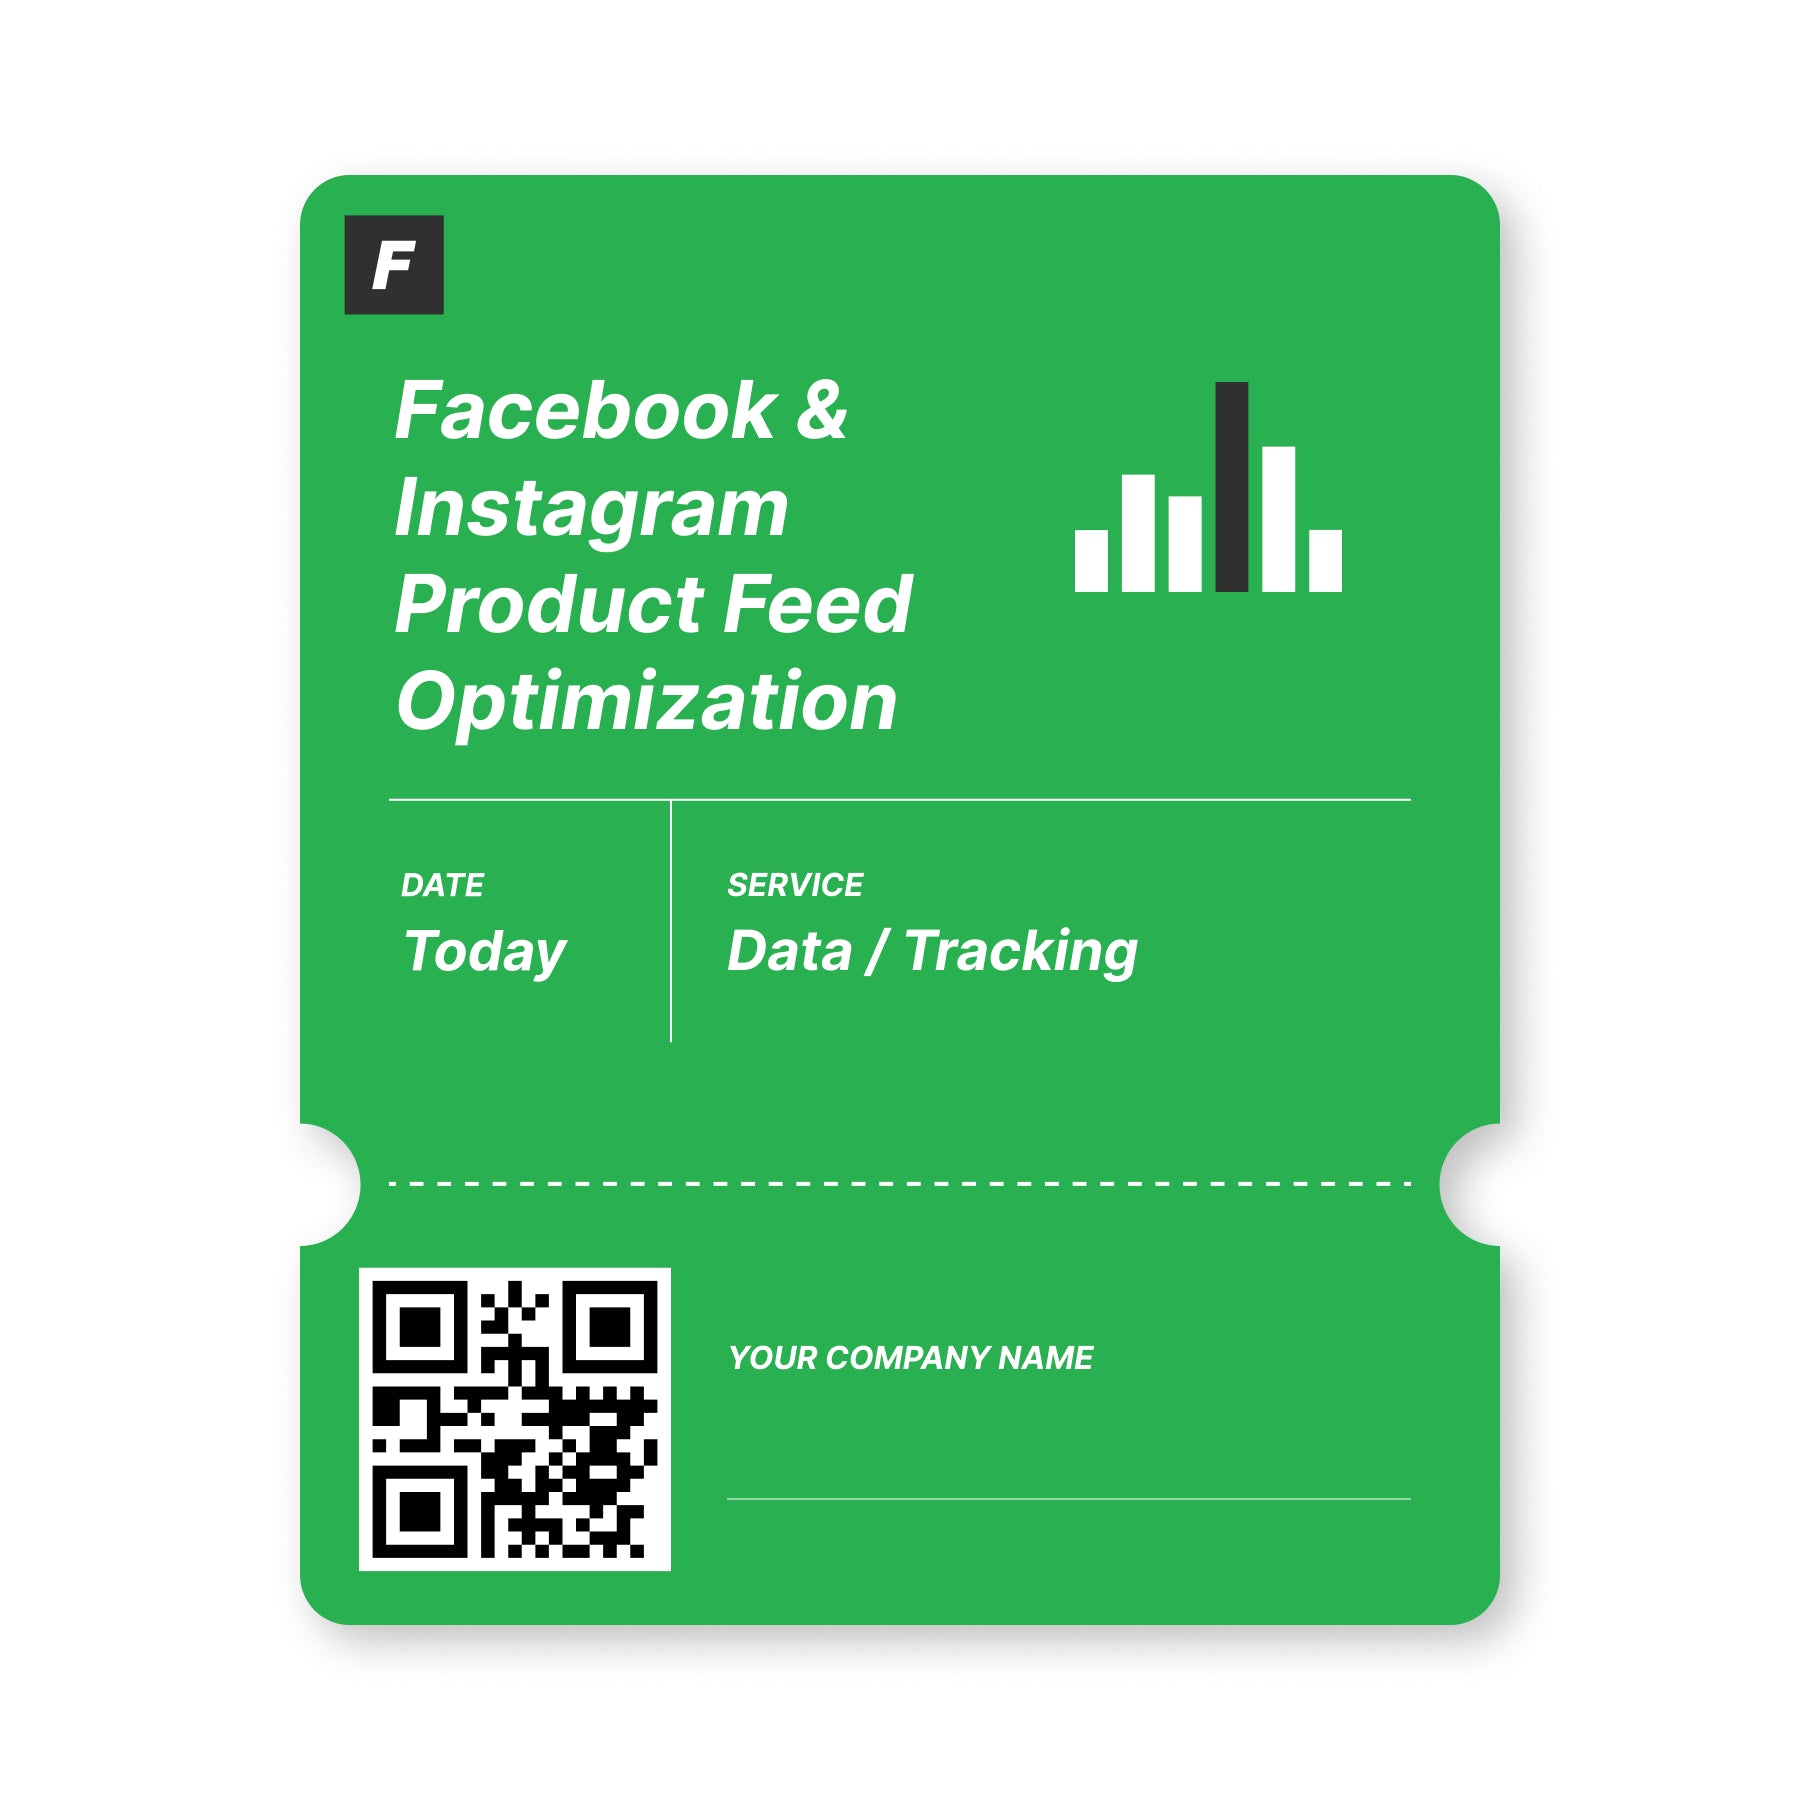 Facebook & Instagram Product Feed Optimization